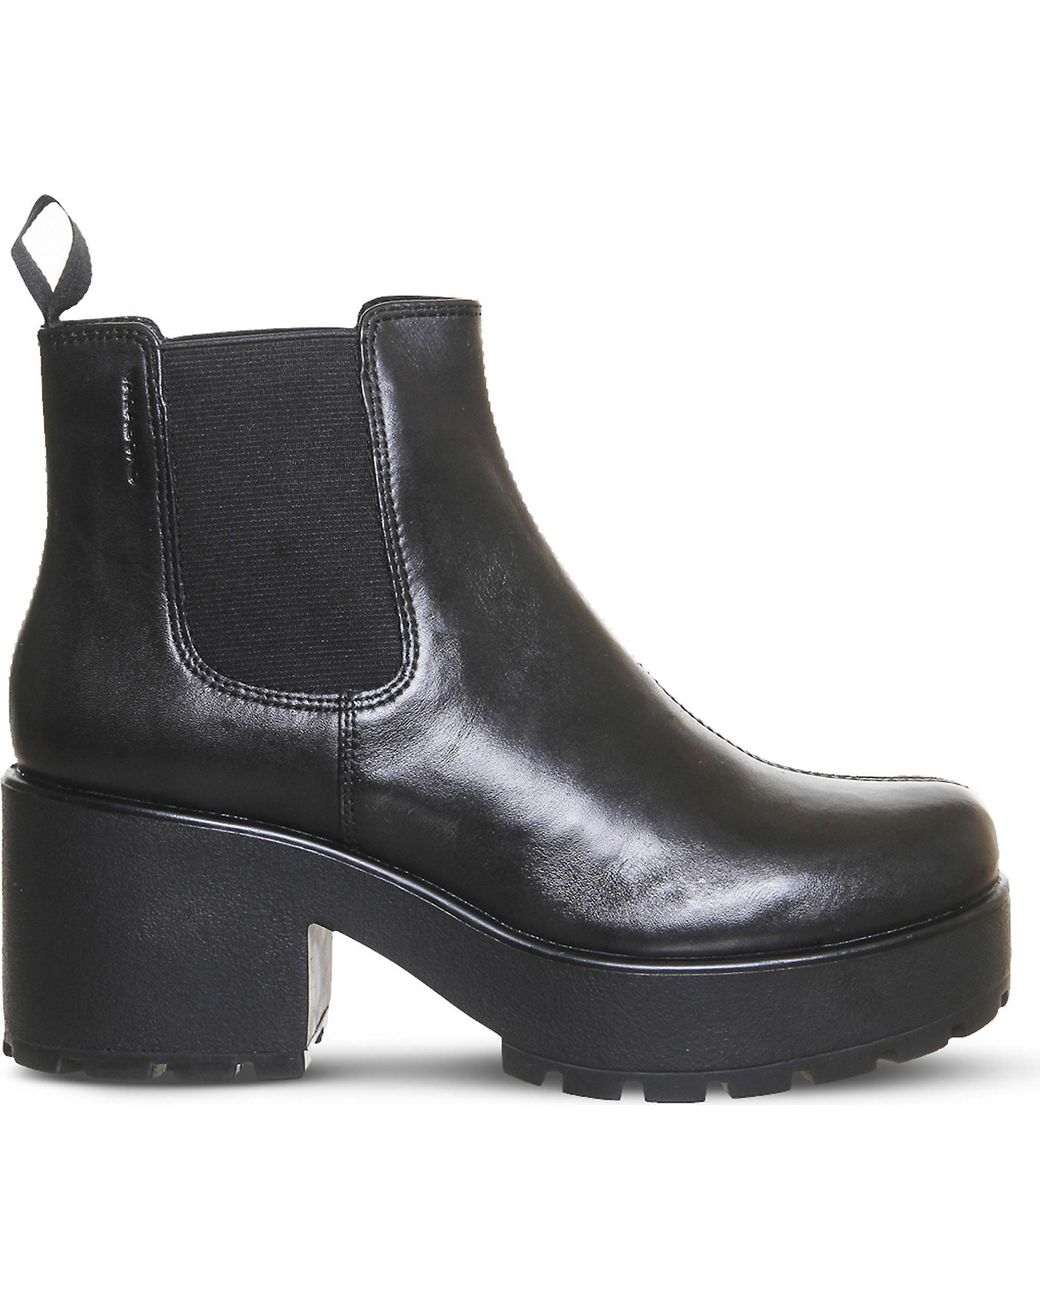 Vagabond Shoemakers Dioon Chunky Leather Chelsea Boots in Black Leather  (Black) | Lyst